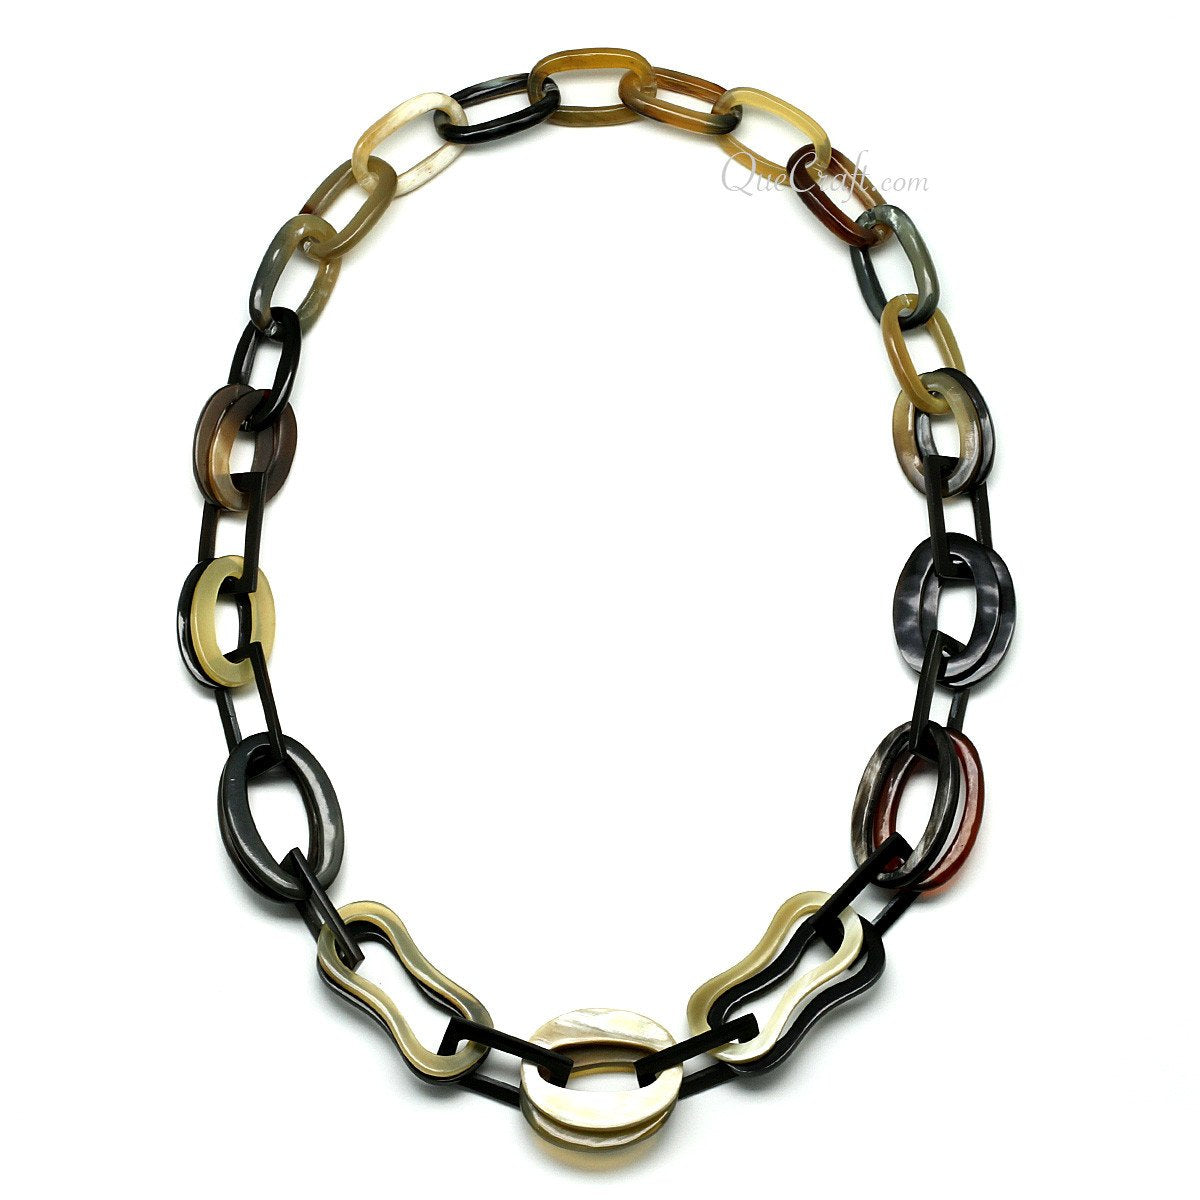 Horn Chain Necklace #11483 - HORN JEWELRY